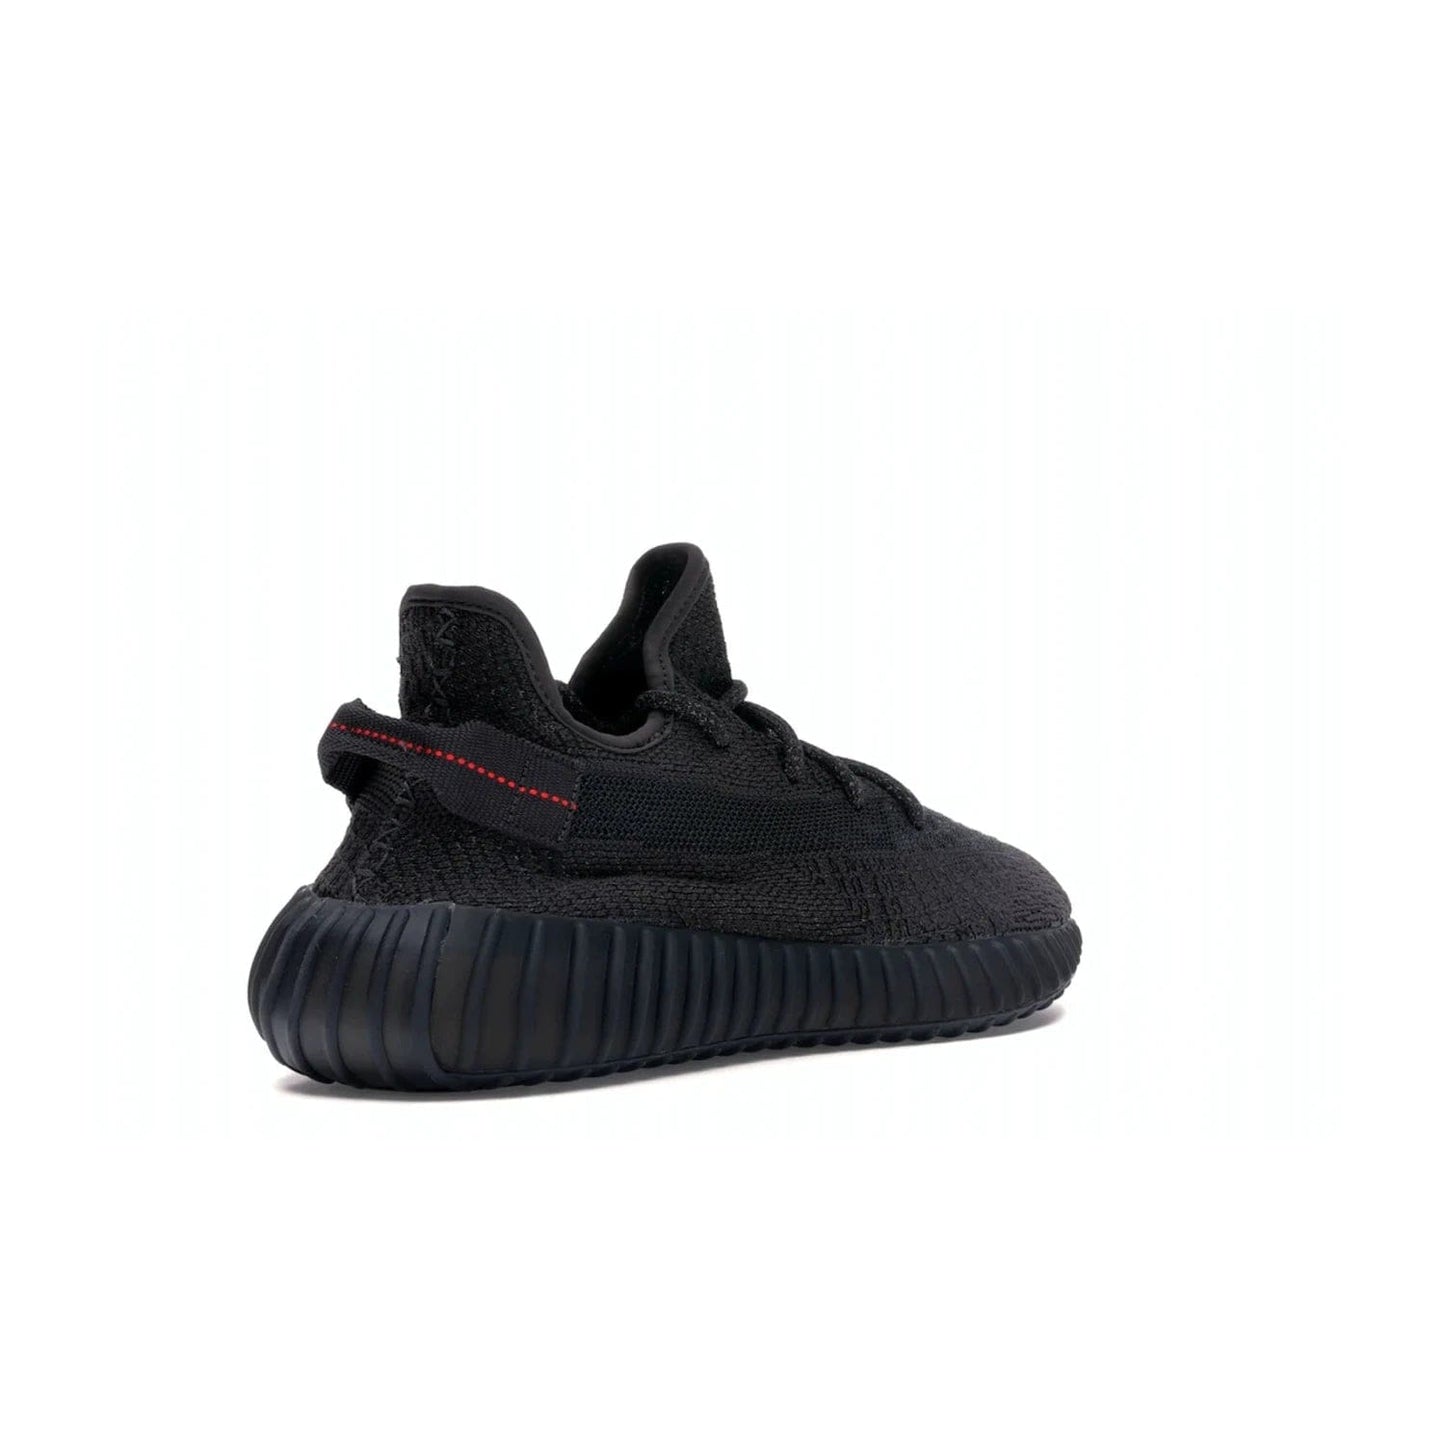 adidas Yeezy Boost 350 V2 Static Black (Reflective) - Image 32 - Only at www.BallersClubKickz.com - Make a statement with the adidas Yeezy Boost 350 V2 Static Black Reflective. All-black upper, reflective accents, midsole, and sole combine for a stylish look. High quality materials. June 2019 release. Add to your collection today.